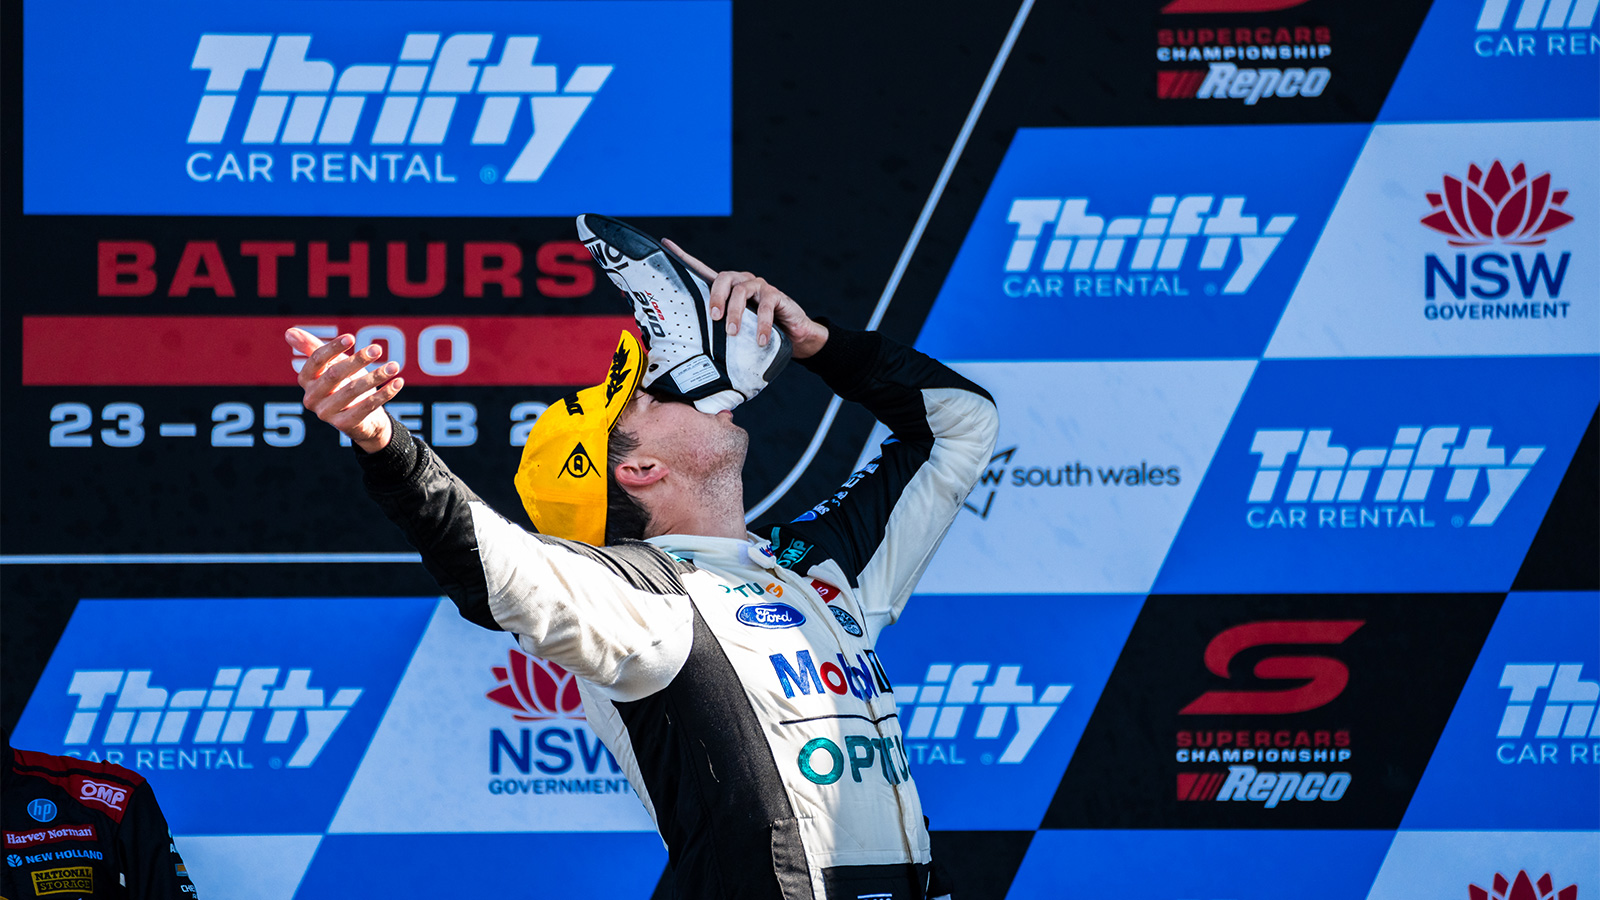 Chaz secures two trophies from two races